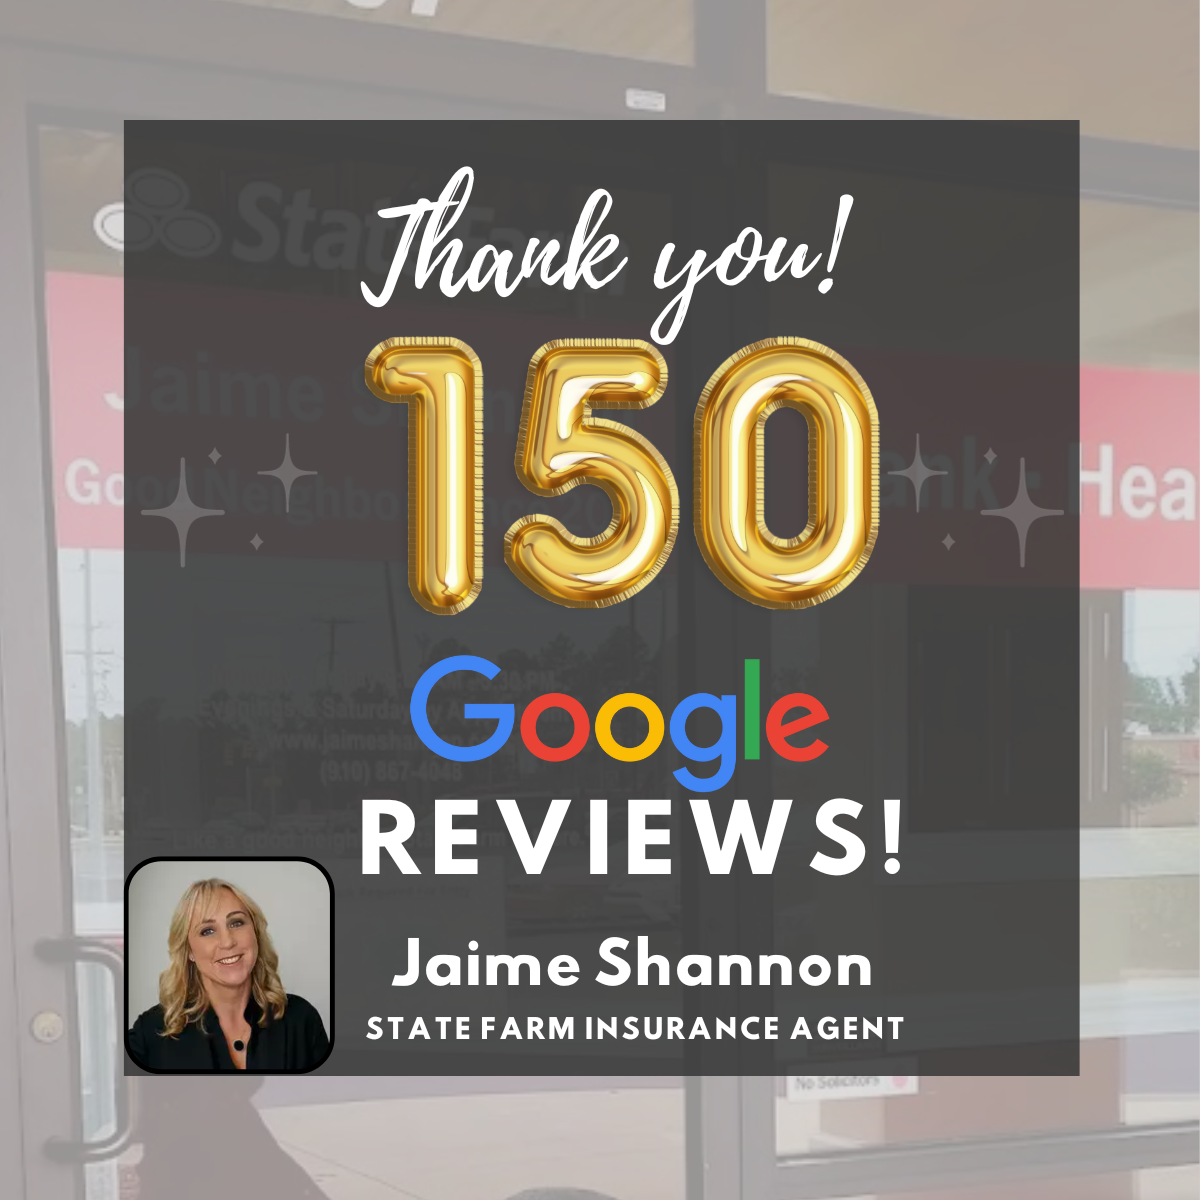 Thank you for 150 Google Reviews! We are so grateful for our wonderful customers!